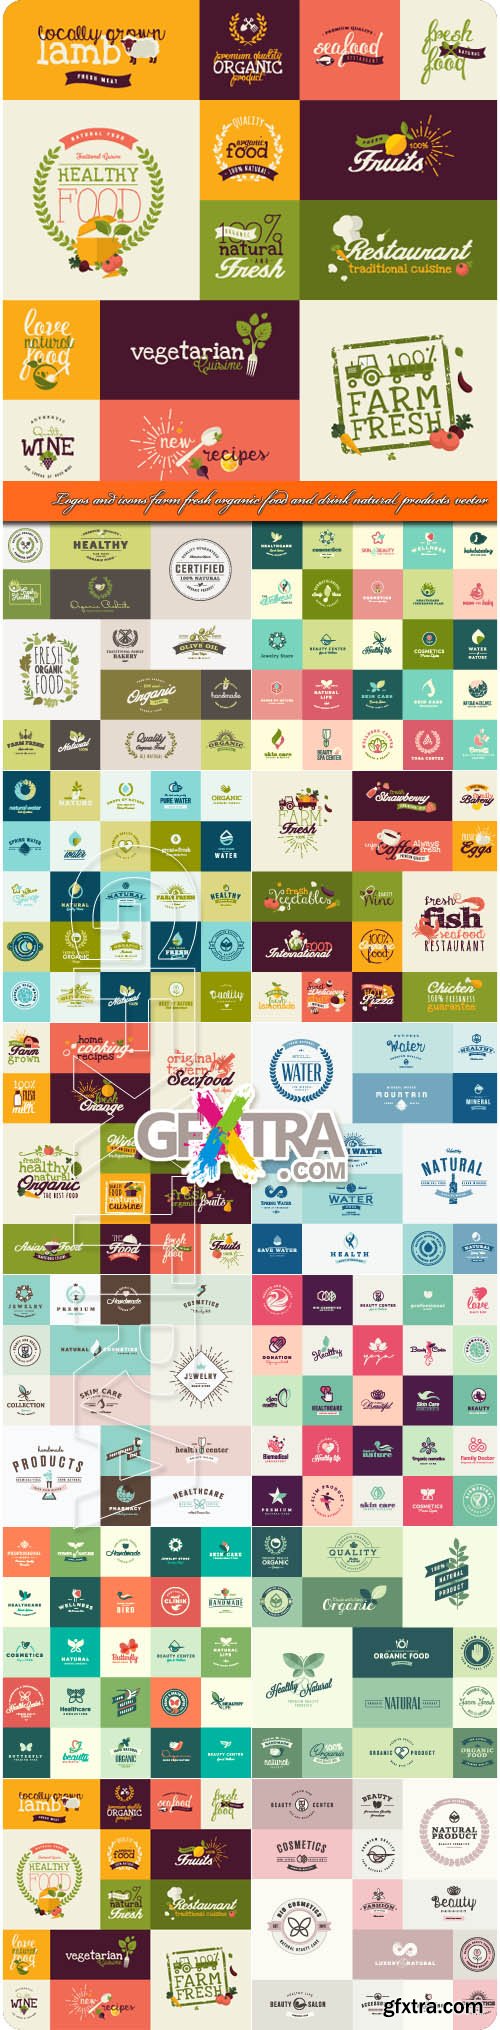 Logos and icons farm fresh organic food drink natural products vector